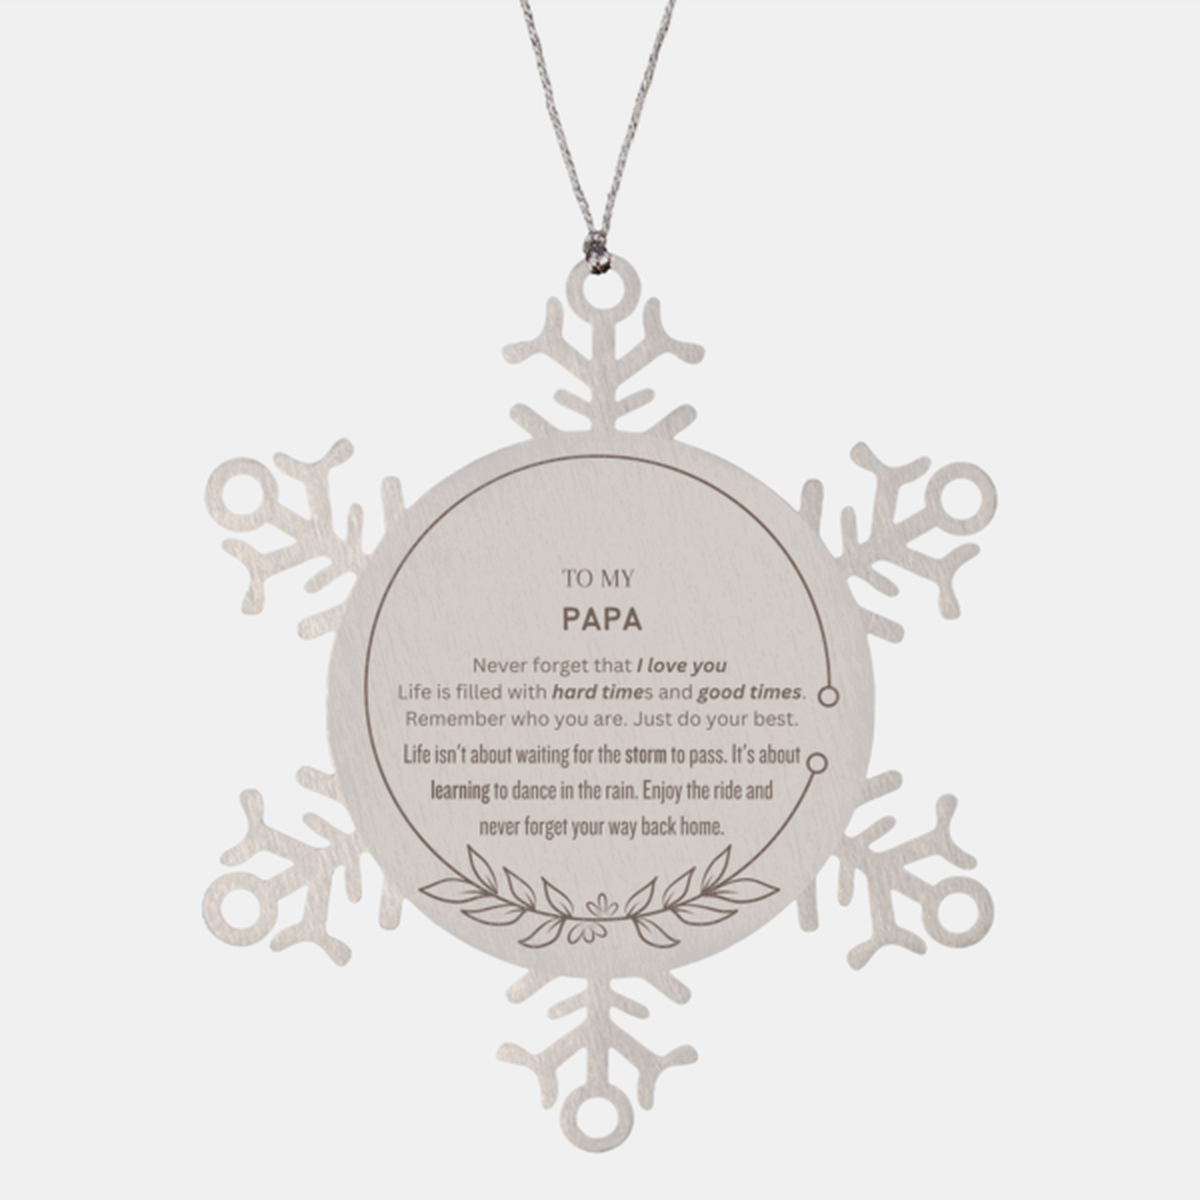 Christmas Papa Snowflake Ornament Gifts, To My Papa Thank You Gifts For Papa, Xmas Decorations Unique Gifts For Papa To My Papa Never forget that I love you life is filled with hard times and good times. Remember who you are. Just do your best